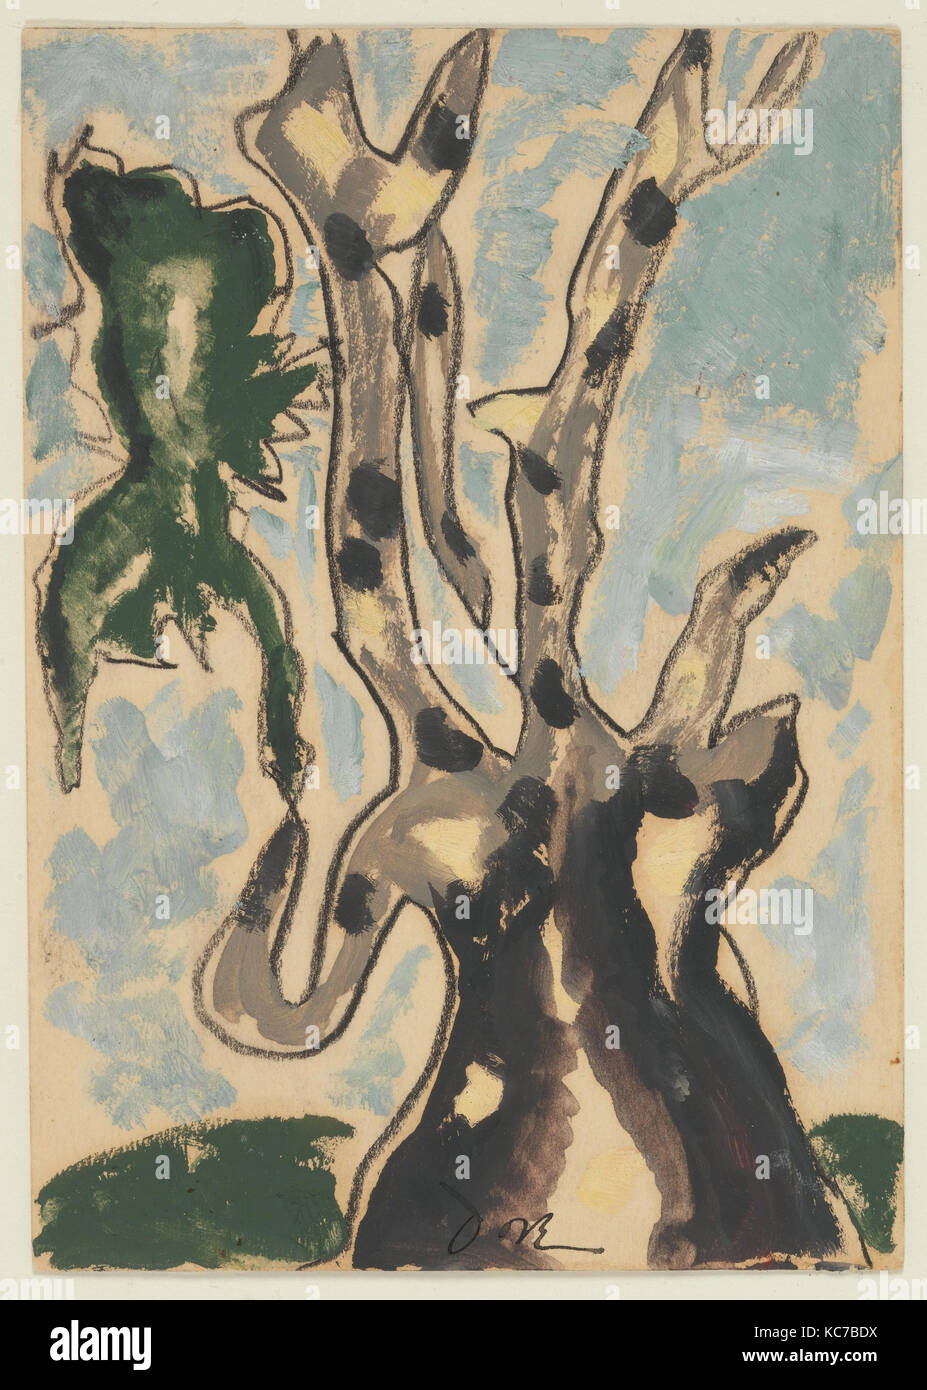 Sycamore, 1935, Wax emulsion, watercolor, and crayon on paper, 6 7/8 x 4 7/8 in. (17.5 x 12.4 cm), Drawings, Arthur Dove Stock Photo